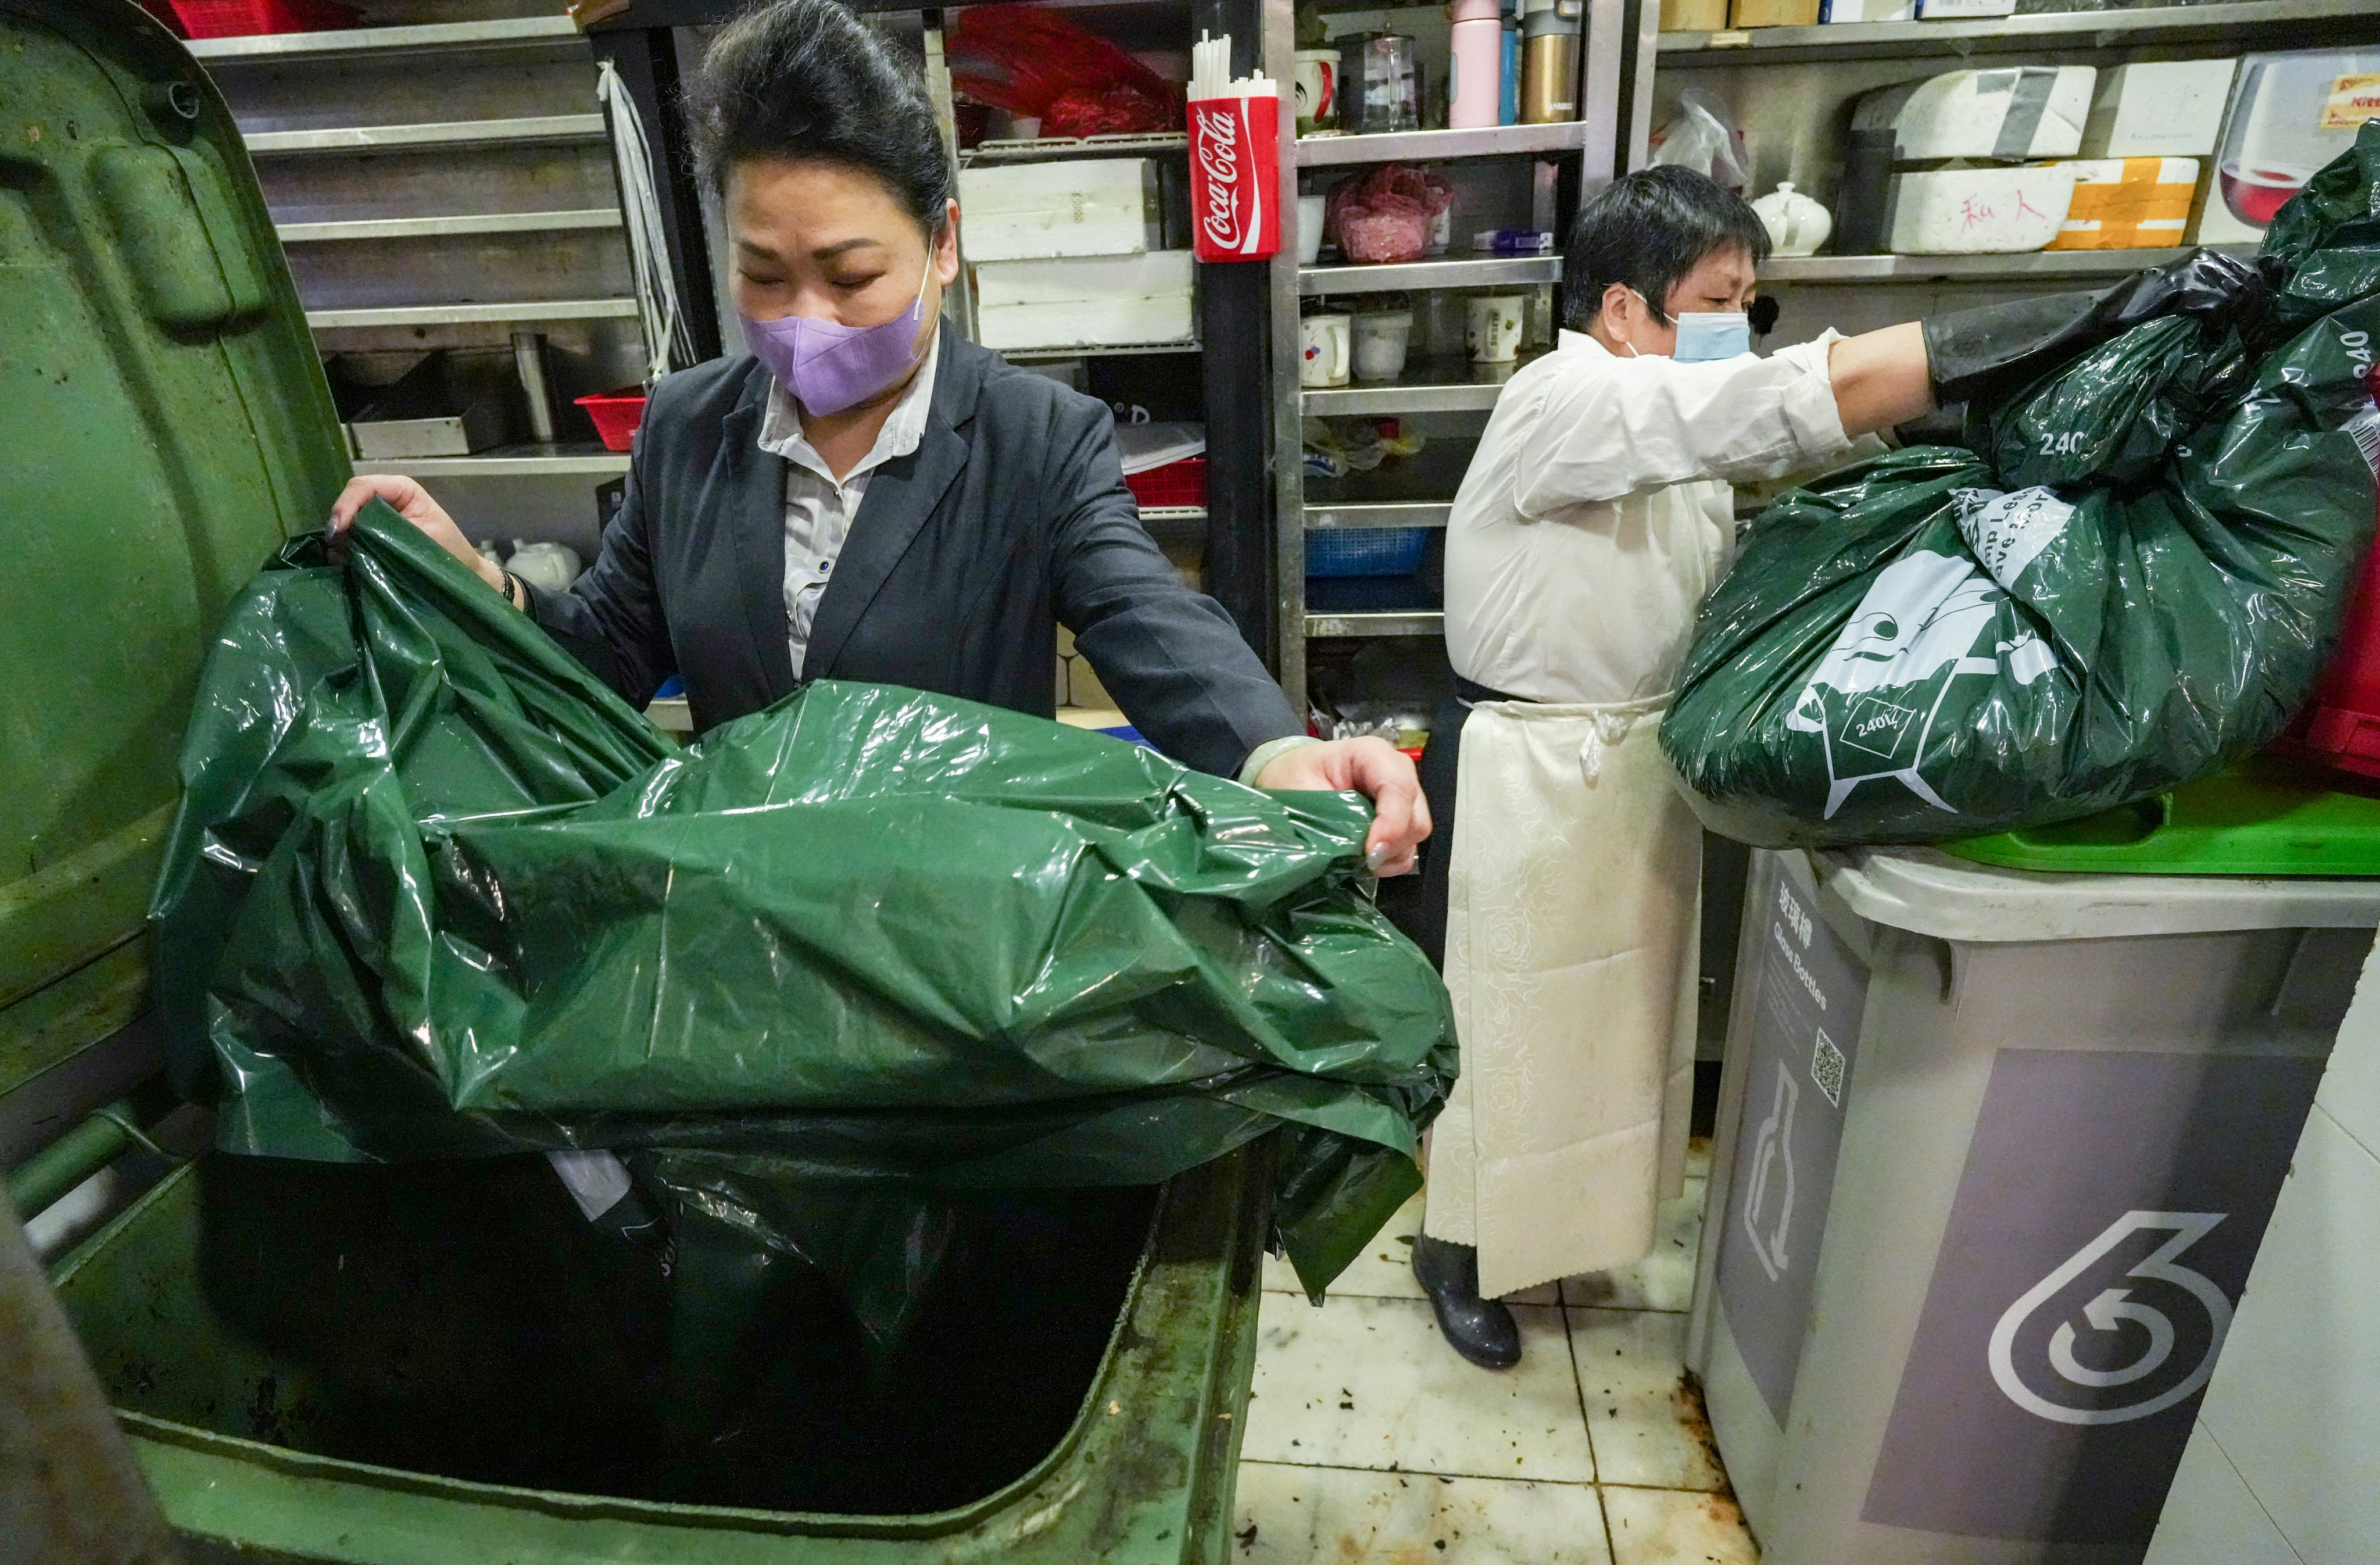 A catering industry leader has said the policy might cost larger restaurants an extra HK$8,000 to HK$10,000 every month to buy the designated bags and handle waste. Photo: May Tse